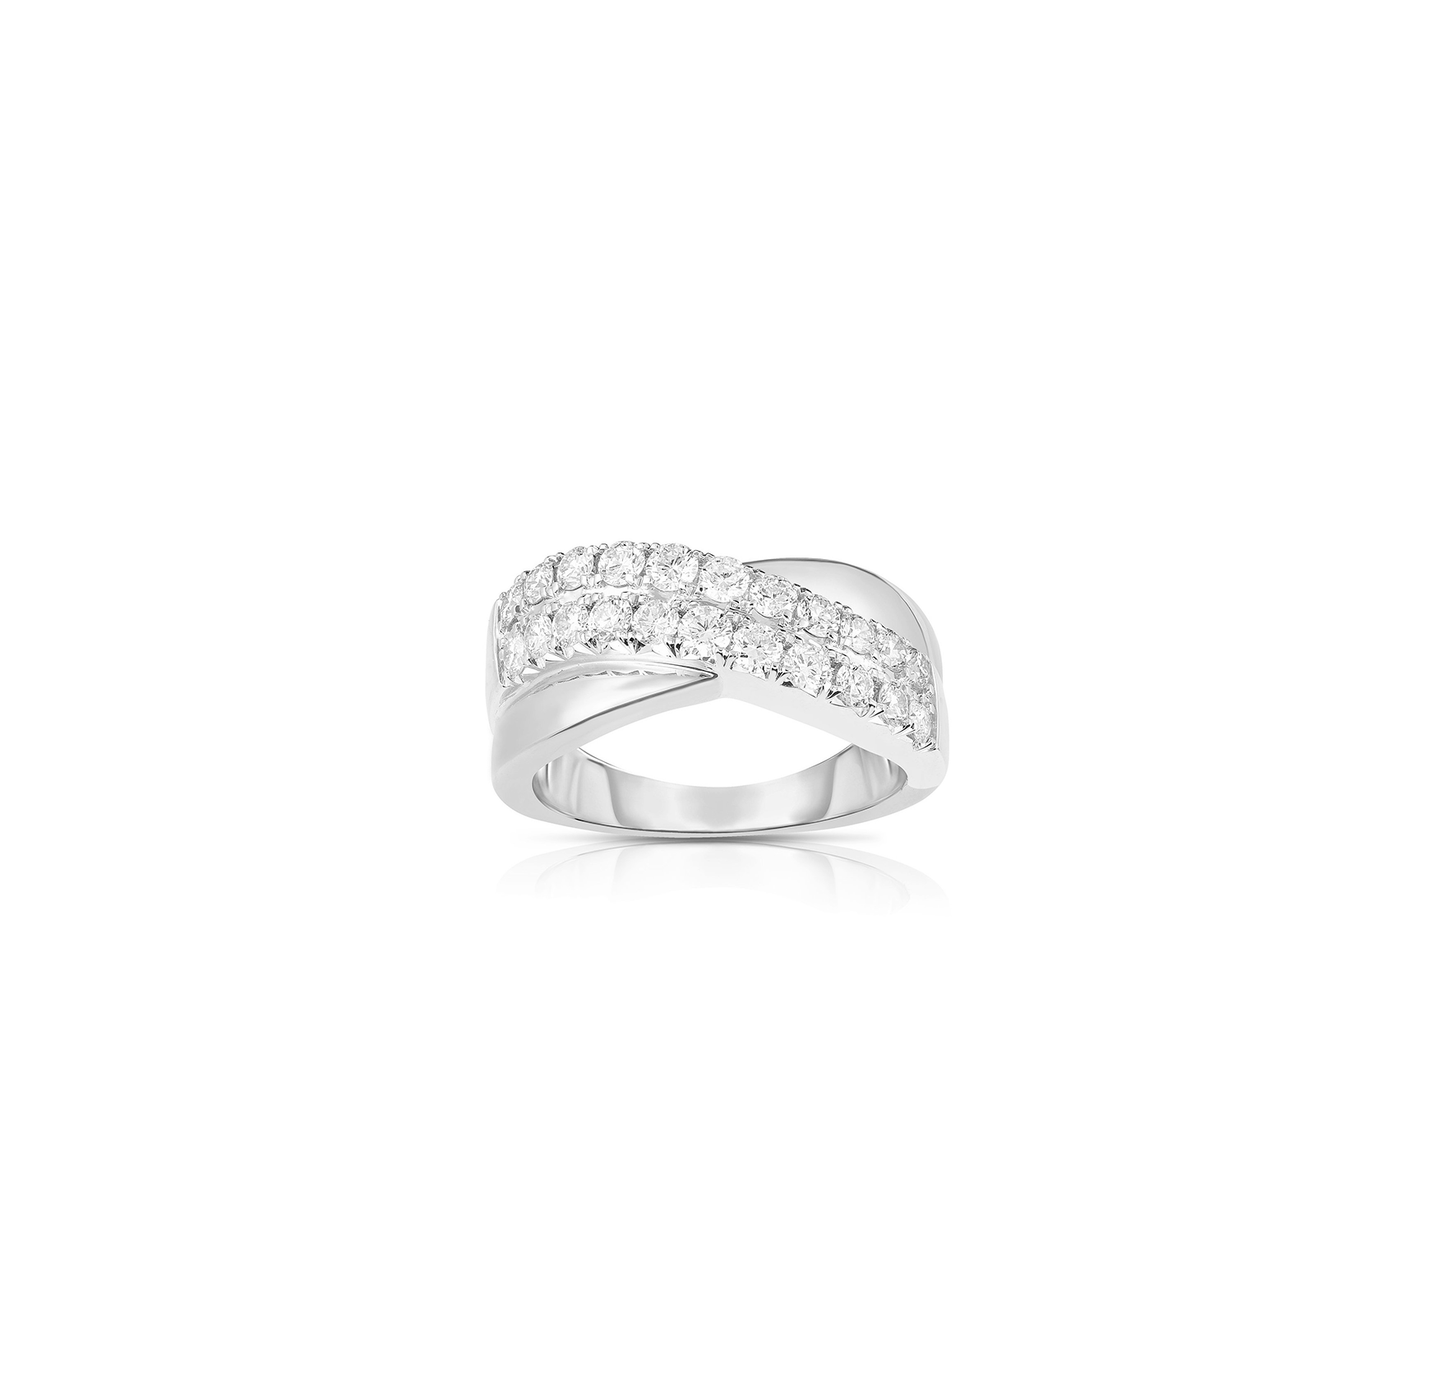 Sabel Collection 14K White Gold Bypass Diamond Ring